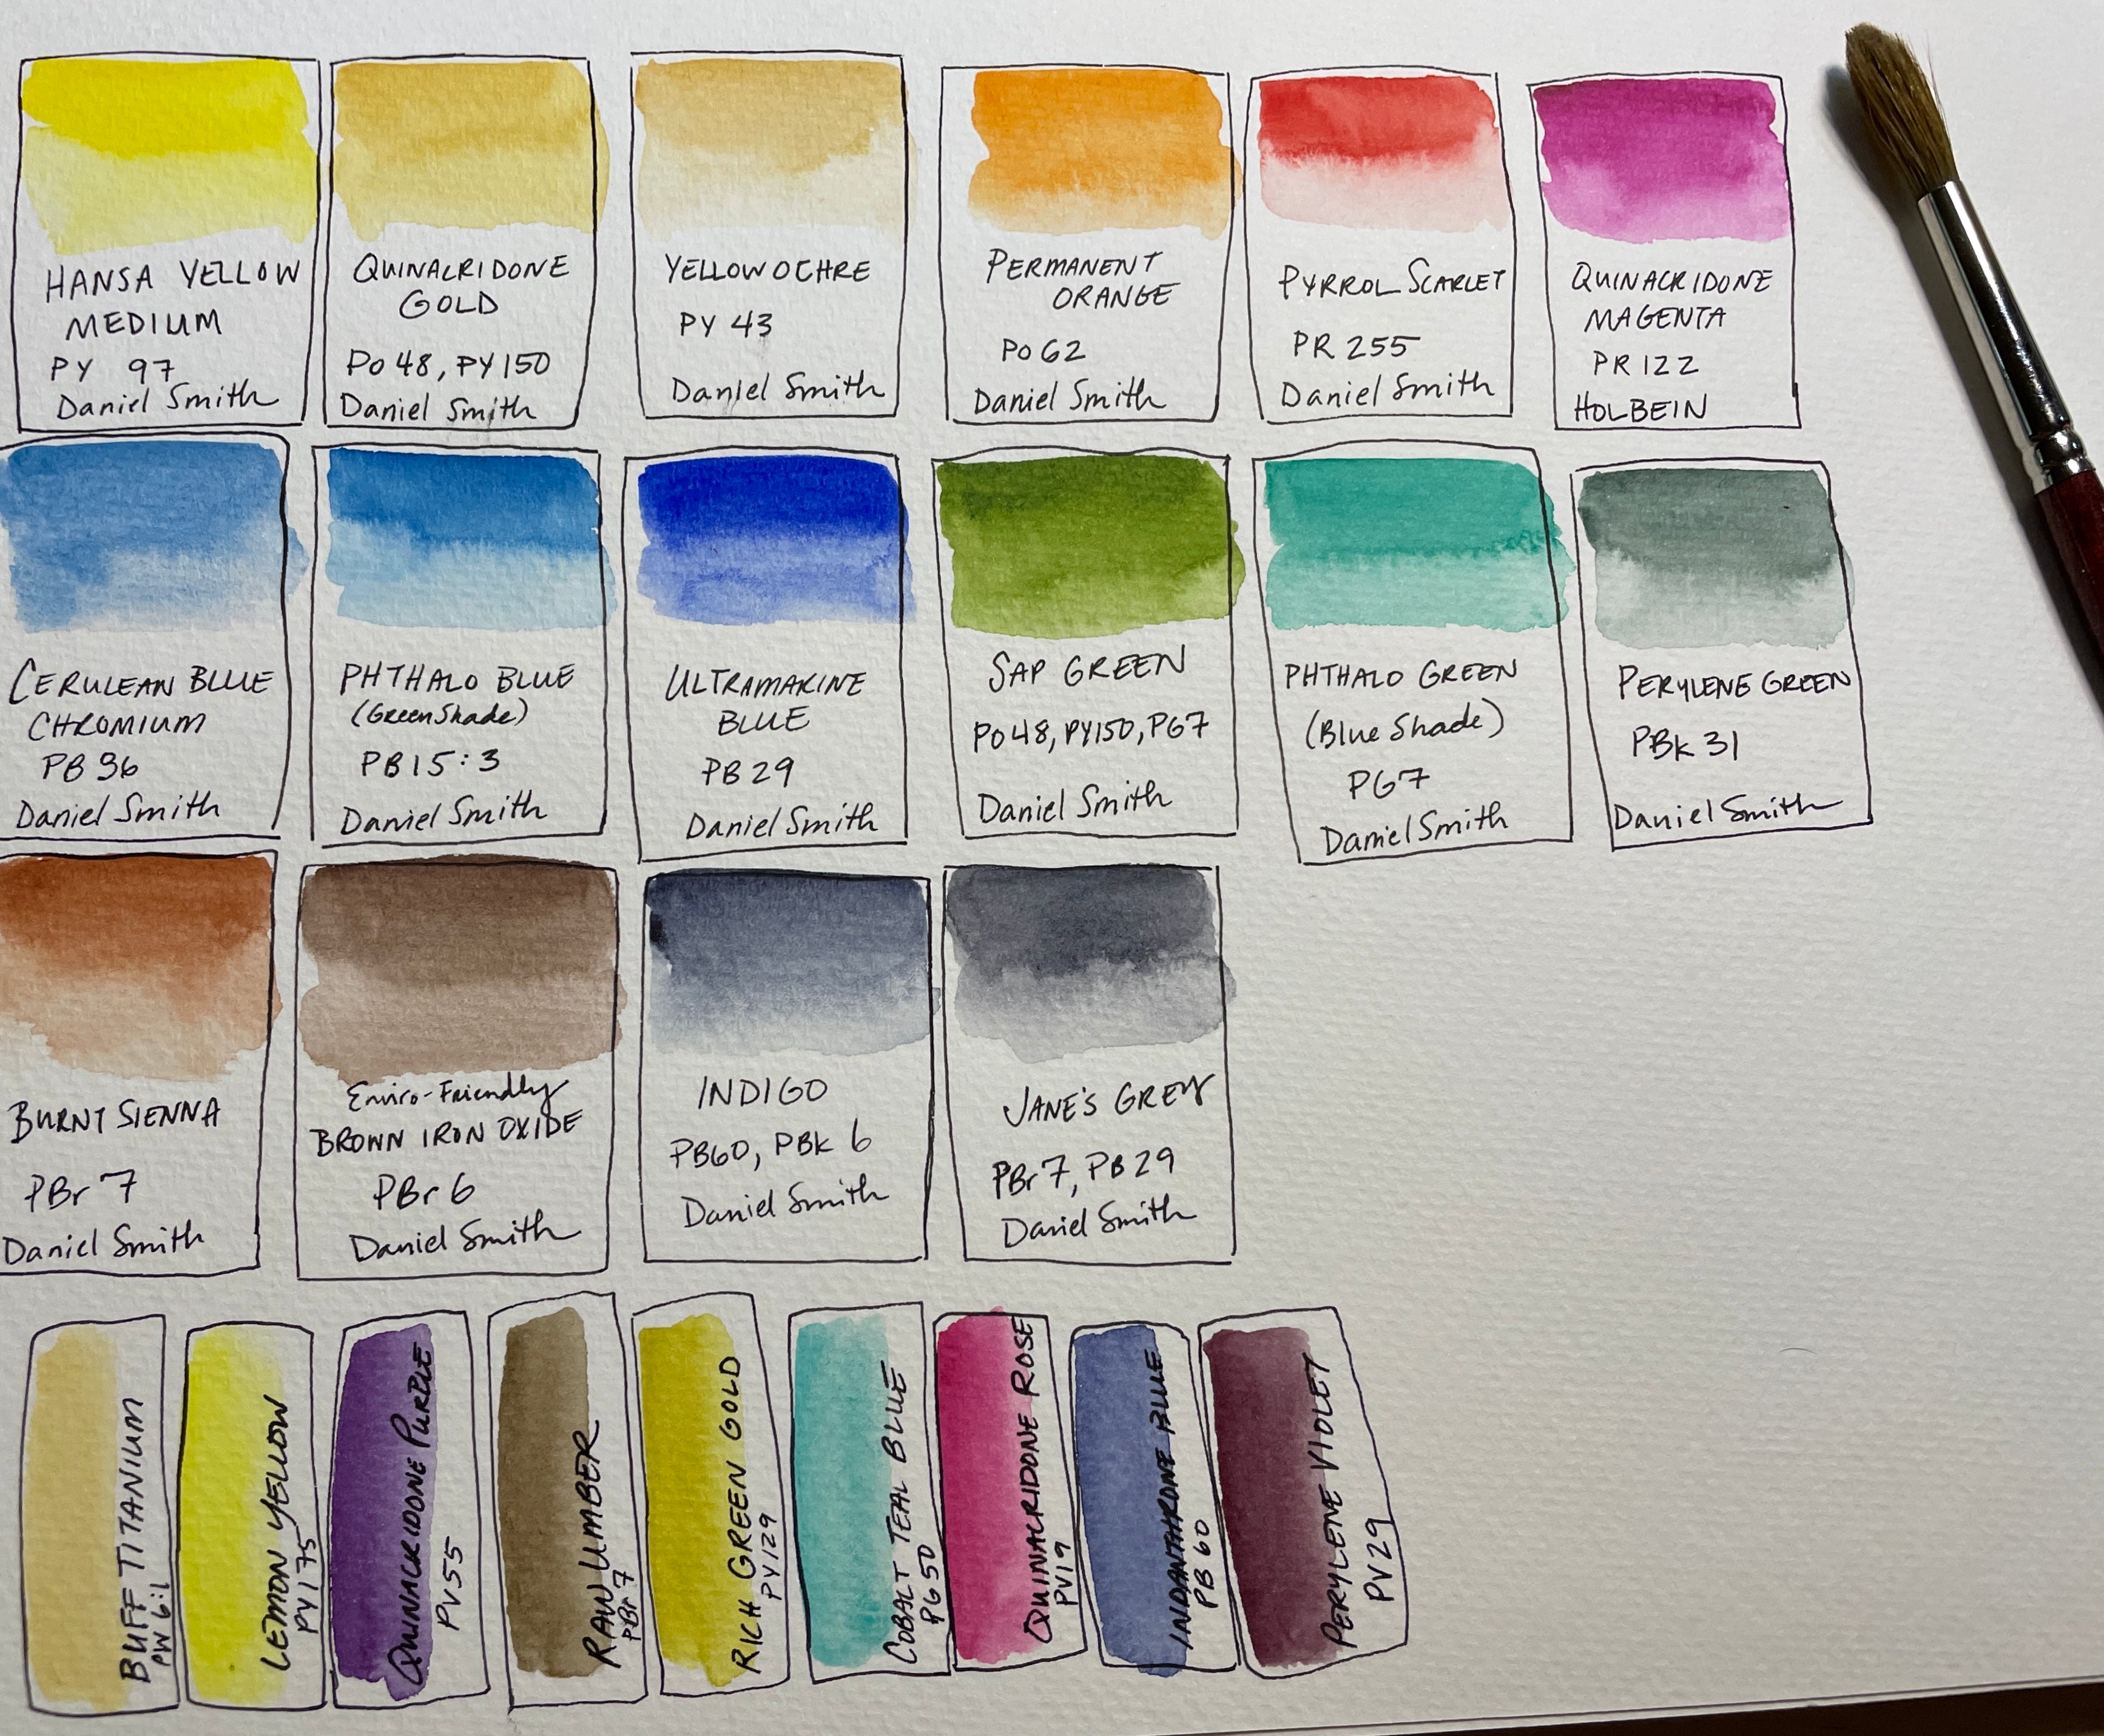 Trying White Nights Watercolor Paints by St Petersburg 